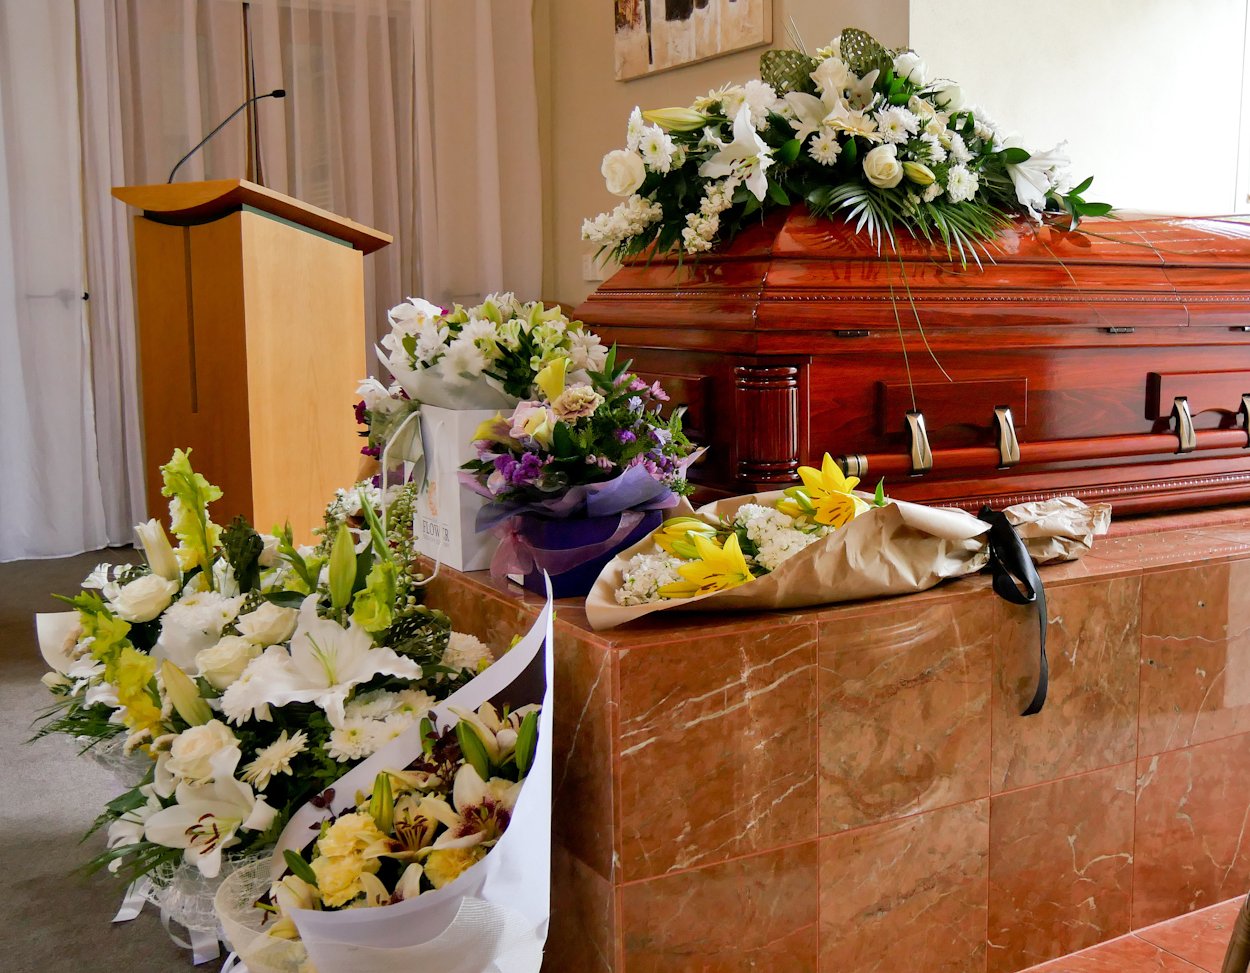 funeral followed by cremation